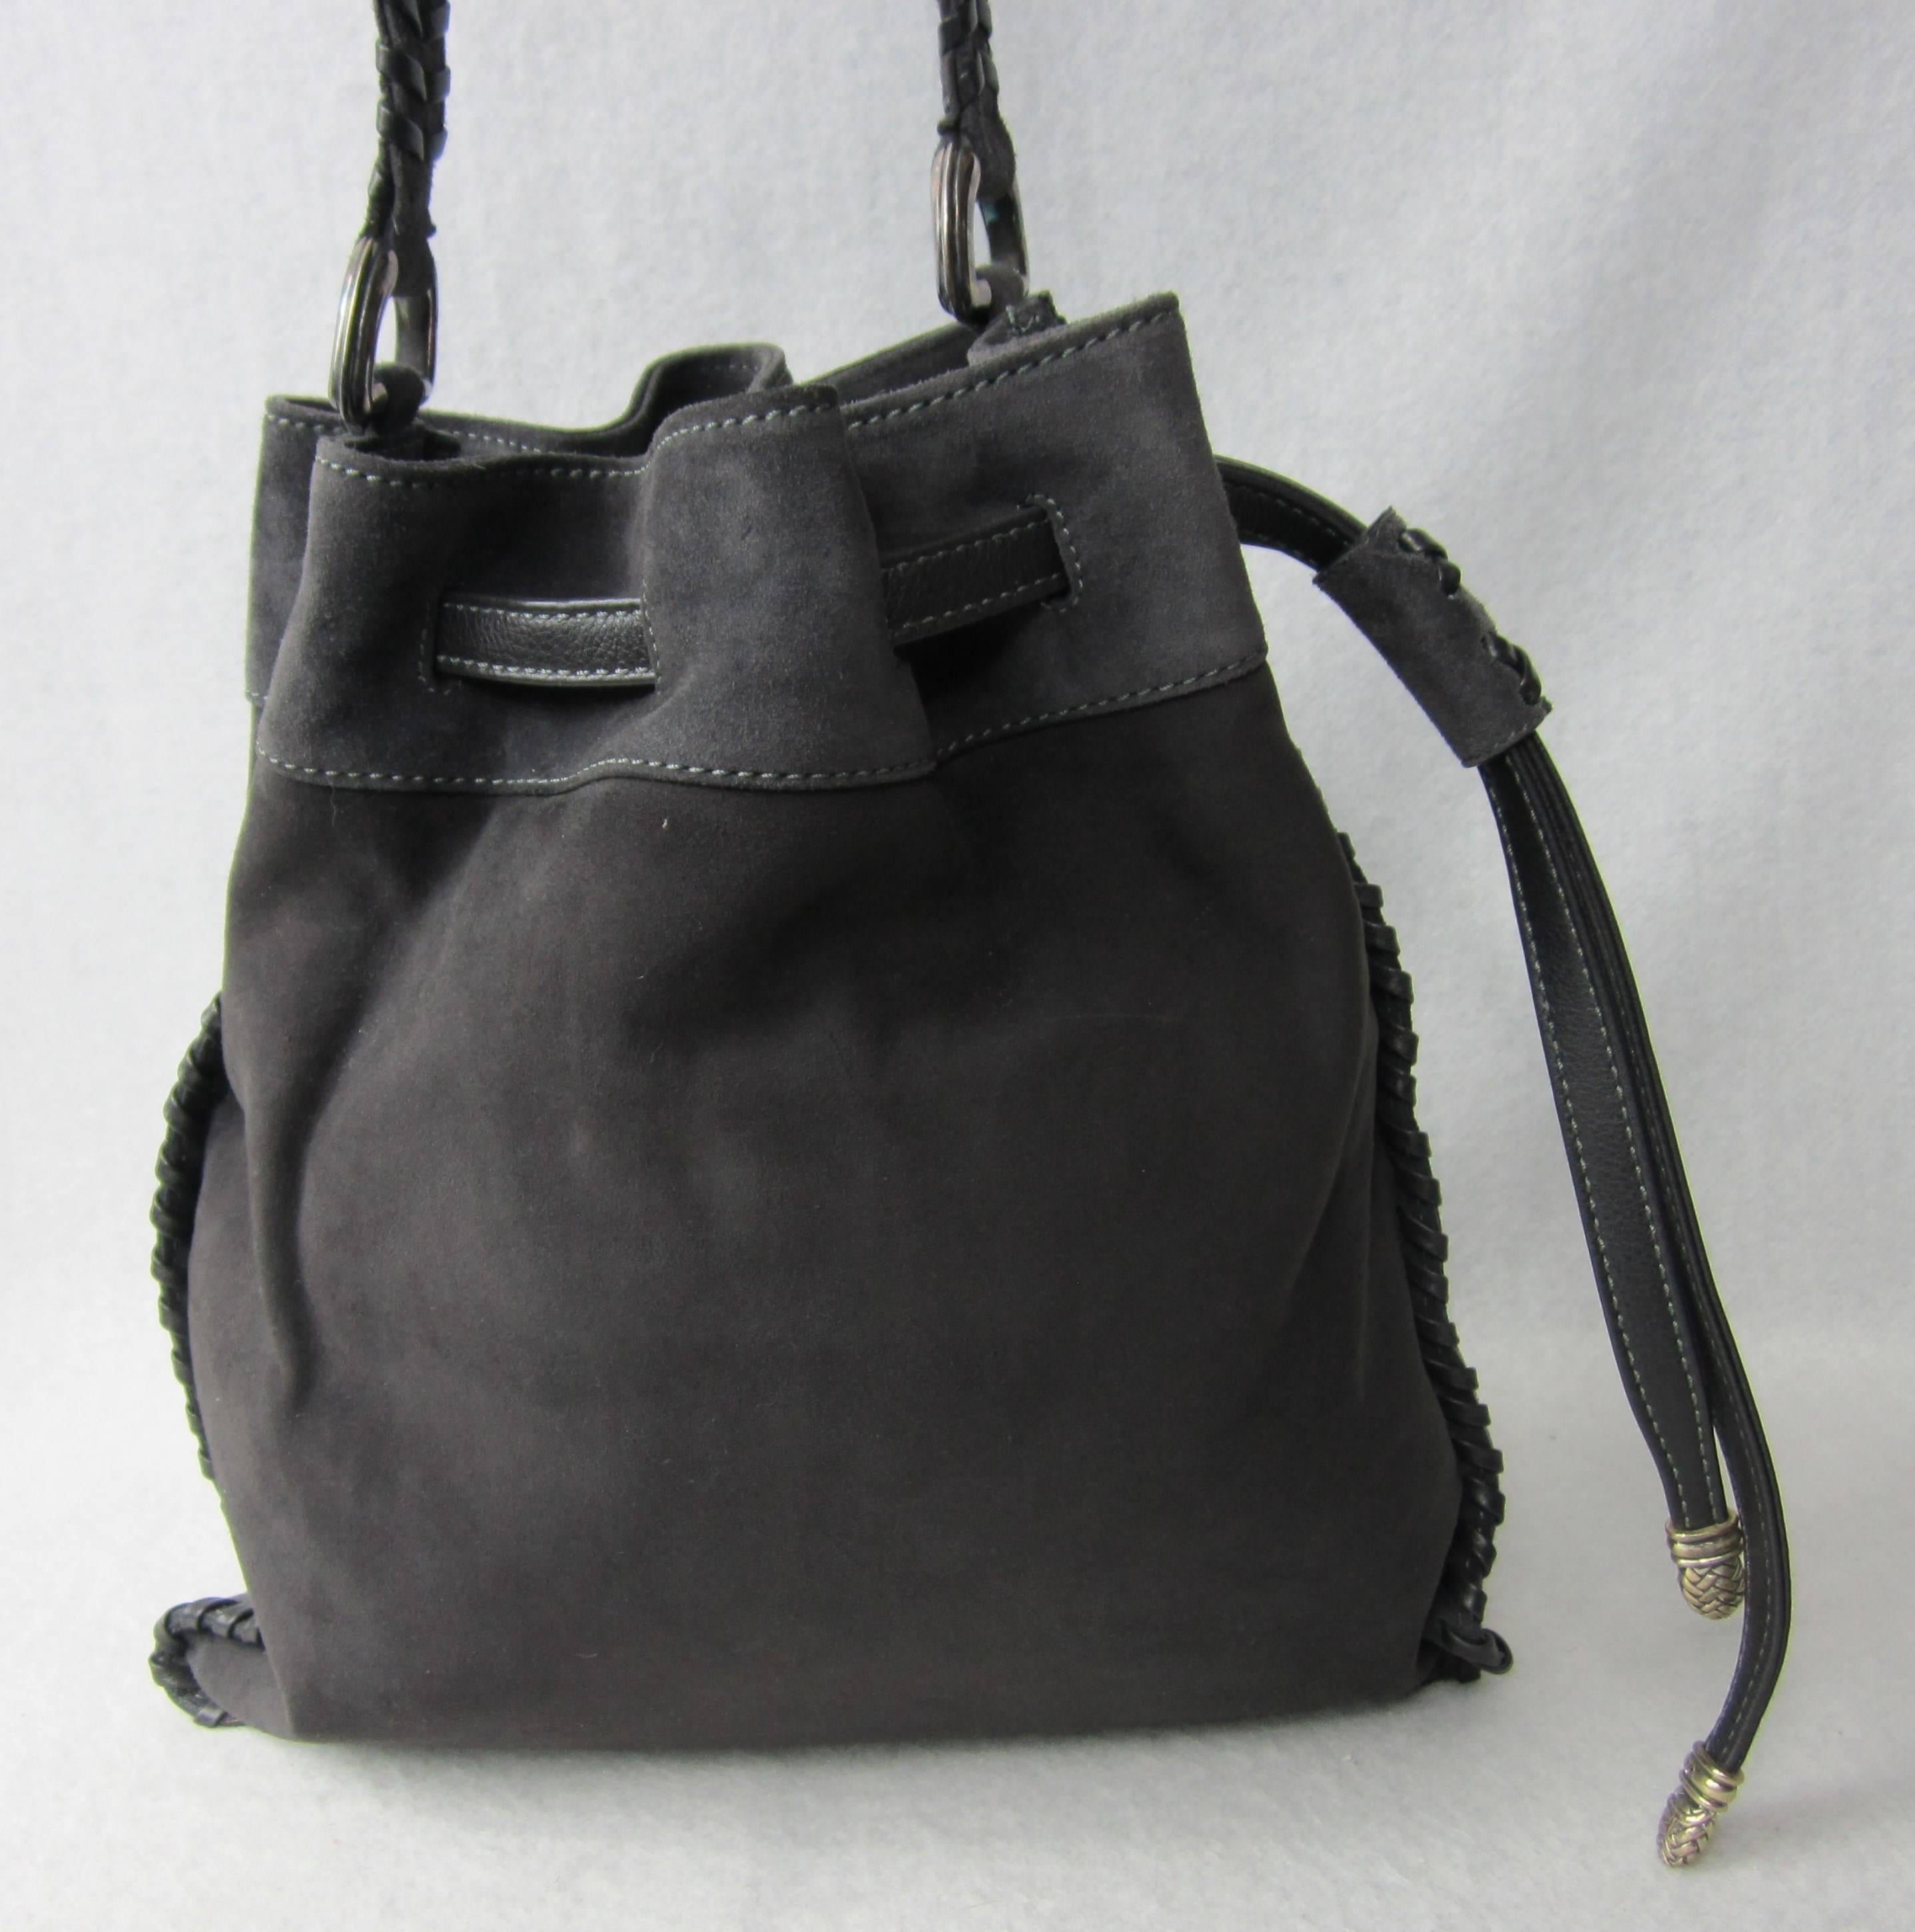 Barry Kieselstein Cord Steel Gray Suede Leather Handbag Purse

Beautiful Kieselstein Cord tote that was purchased at Bergdorf Goodman back in the 1990s then stored away

Stunning Deep Dark Steel Gray color, with Sterling Silver Hardware and a